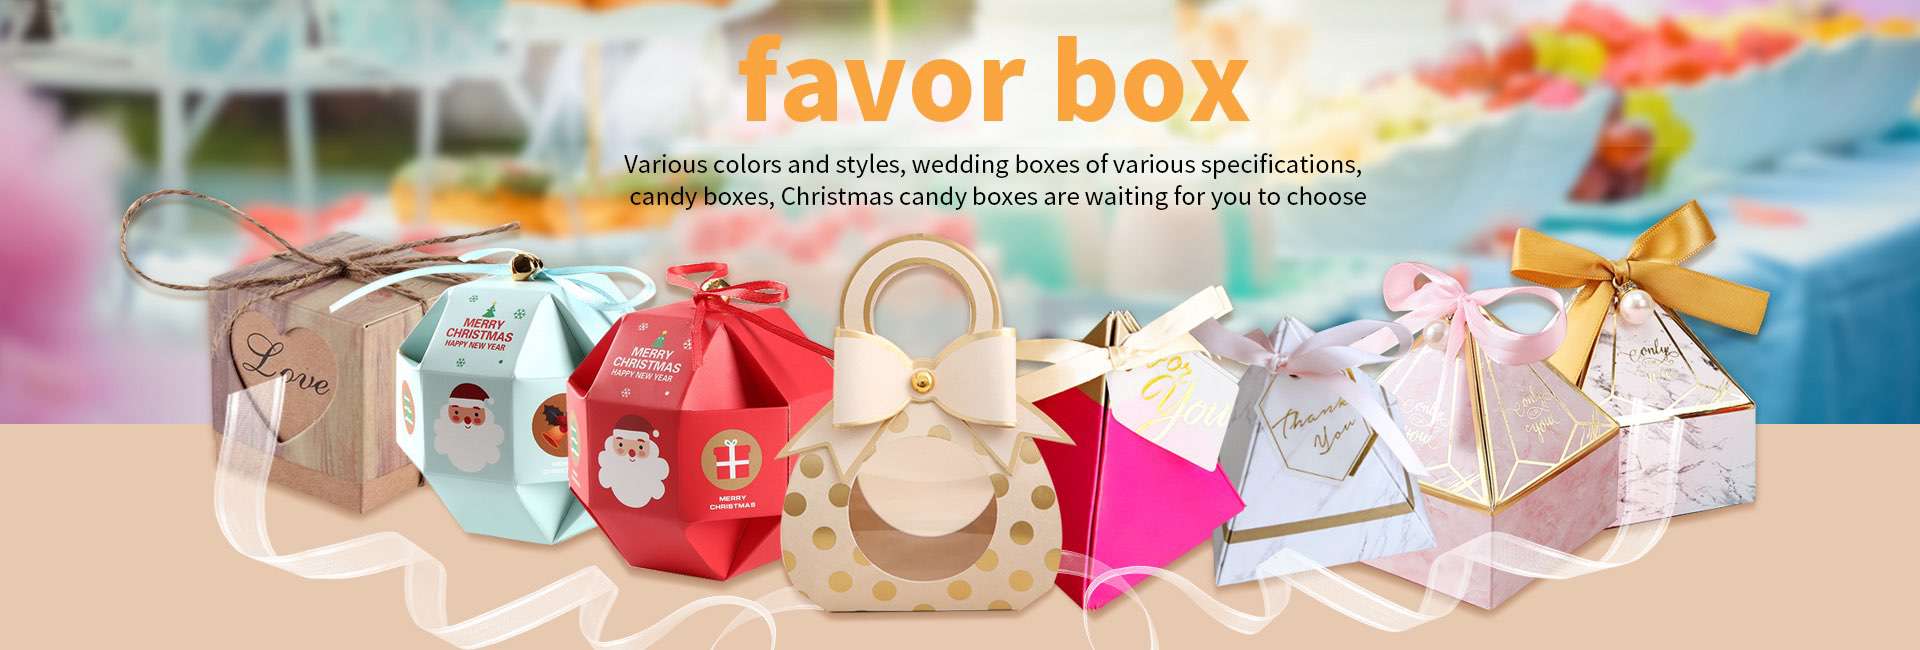 Various wedding boxes, candy boxes